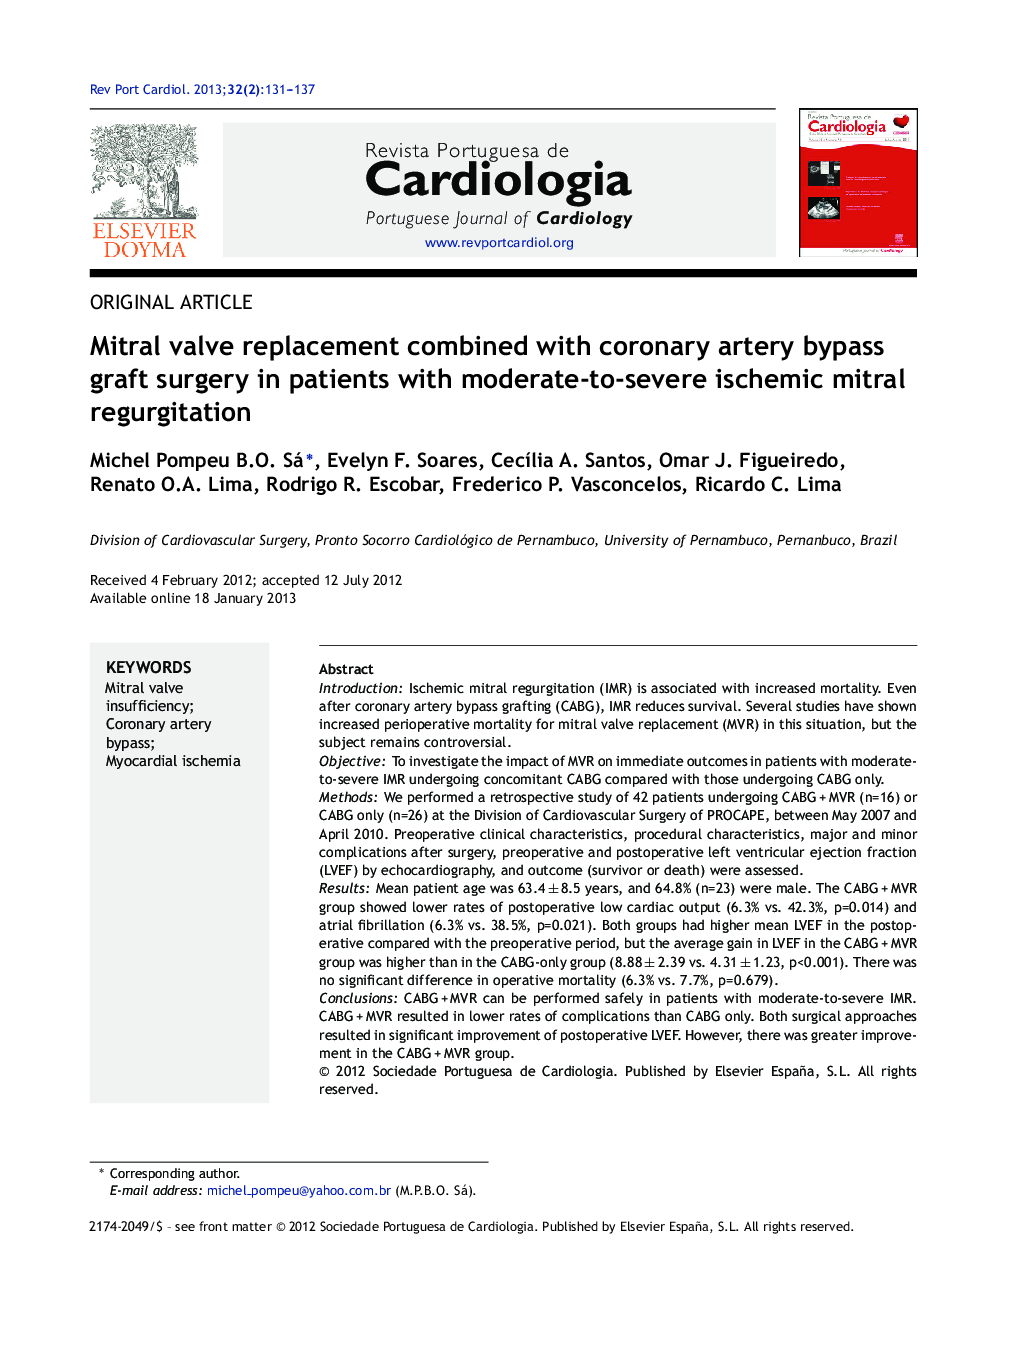 Mitral valve replacement combined with coronary artery bypass graft surgery in patients with moderate-to-severe ischemic mitral regurgitation